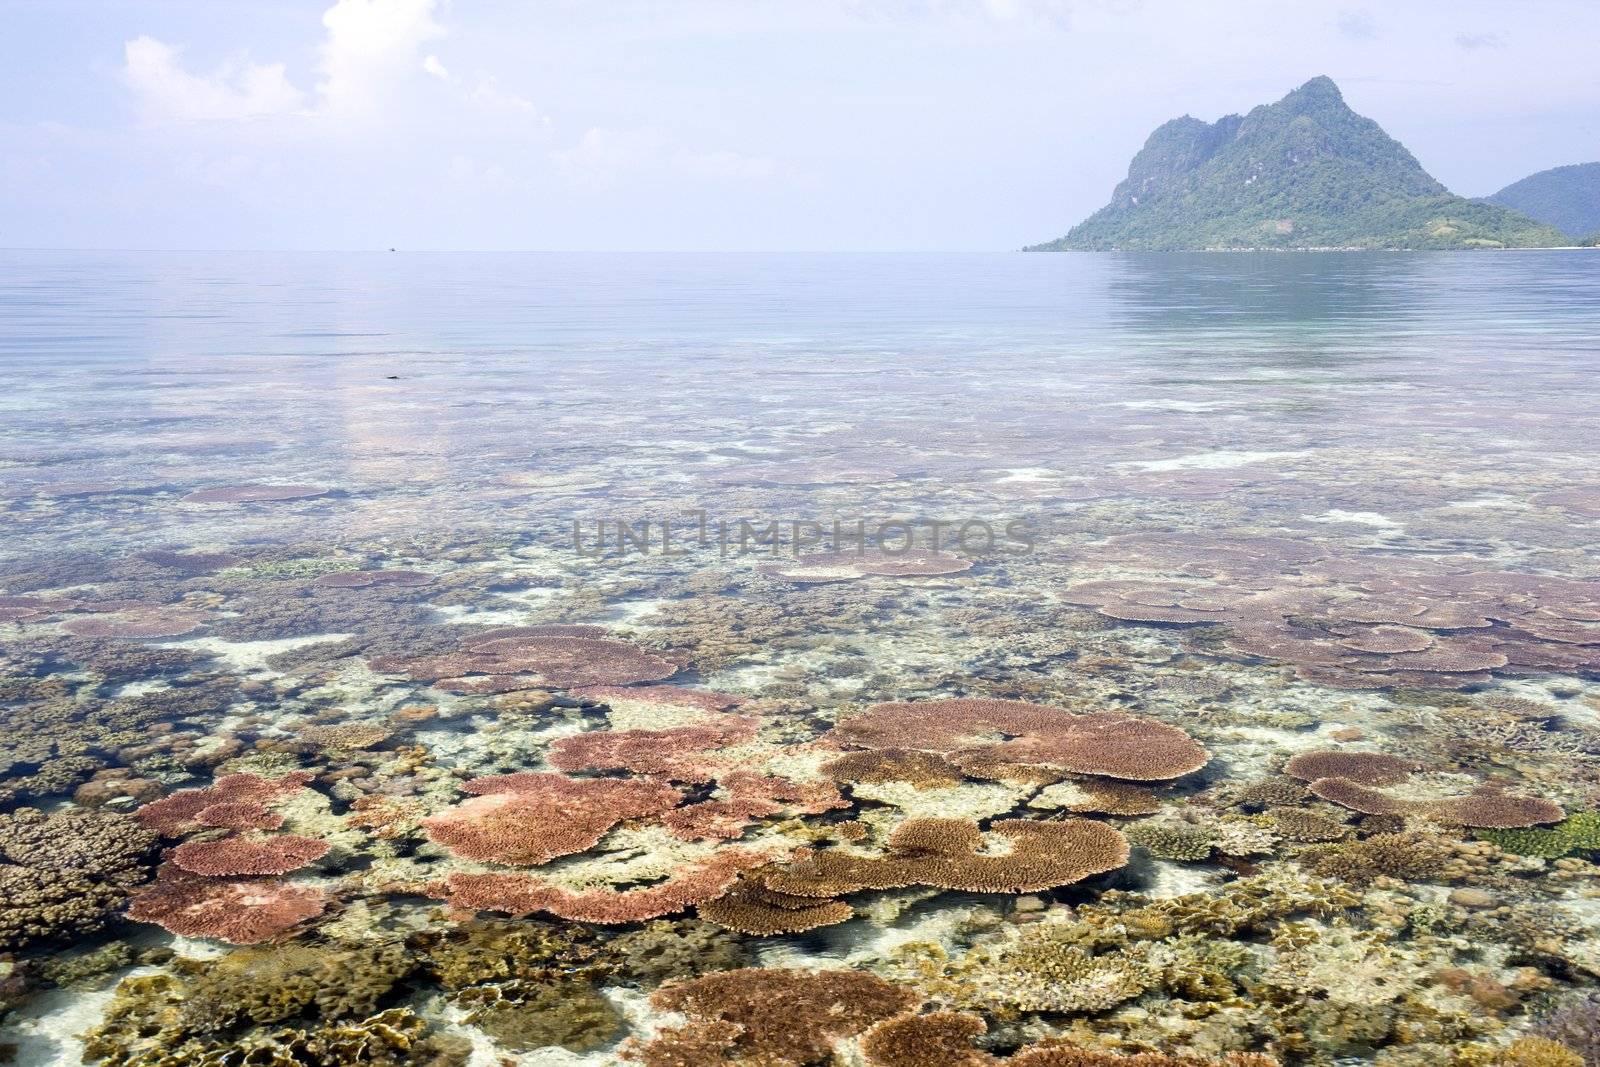 Image of a coral reef with an island in the background.